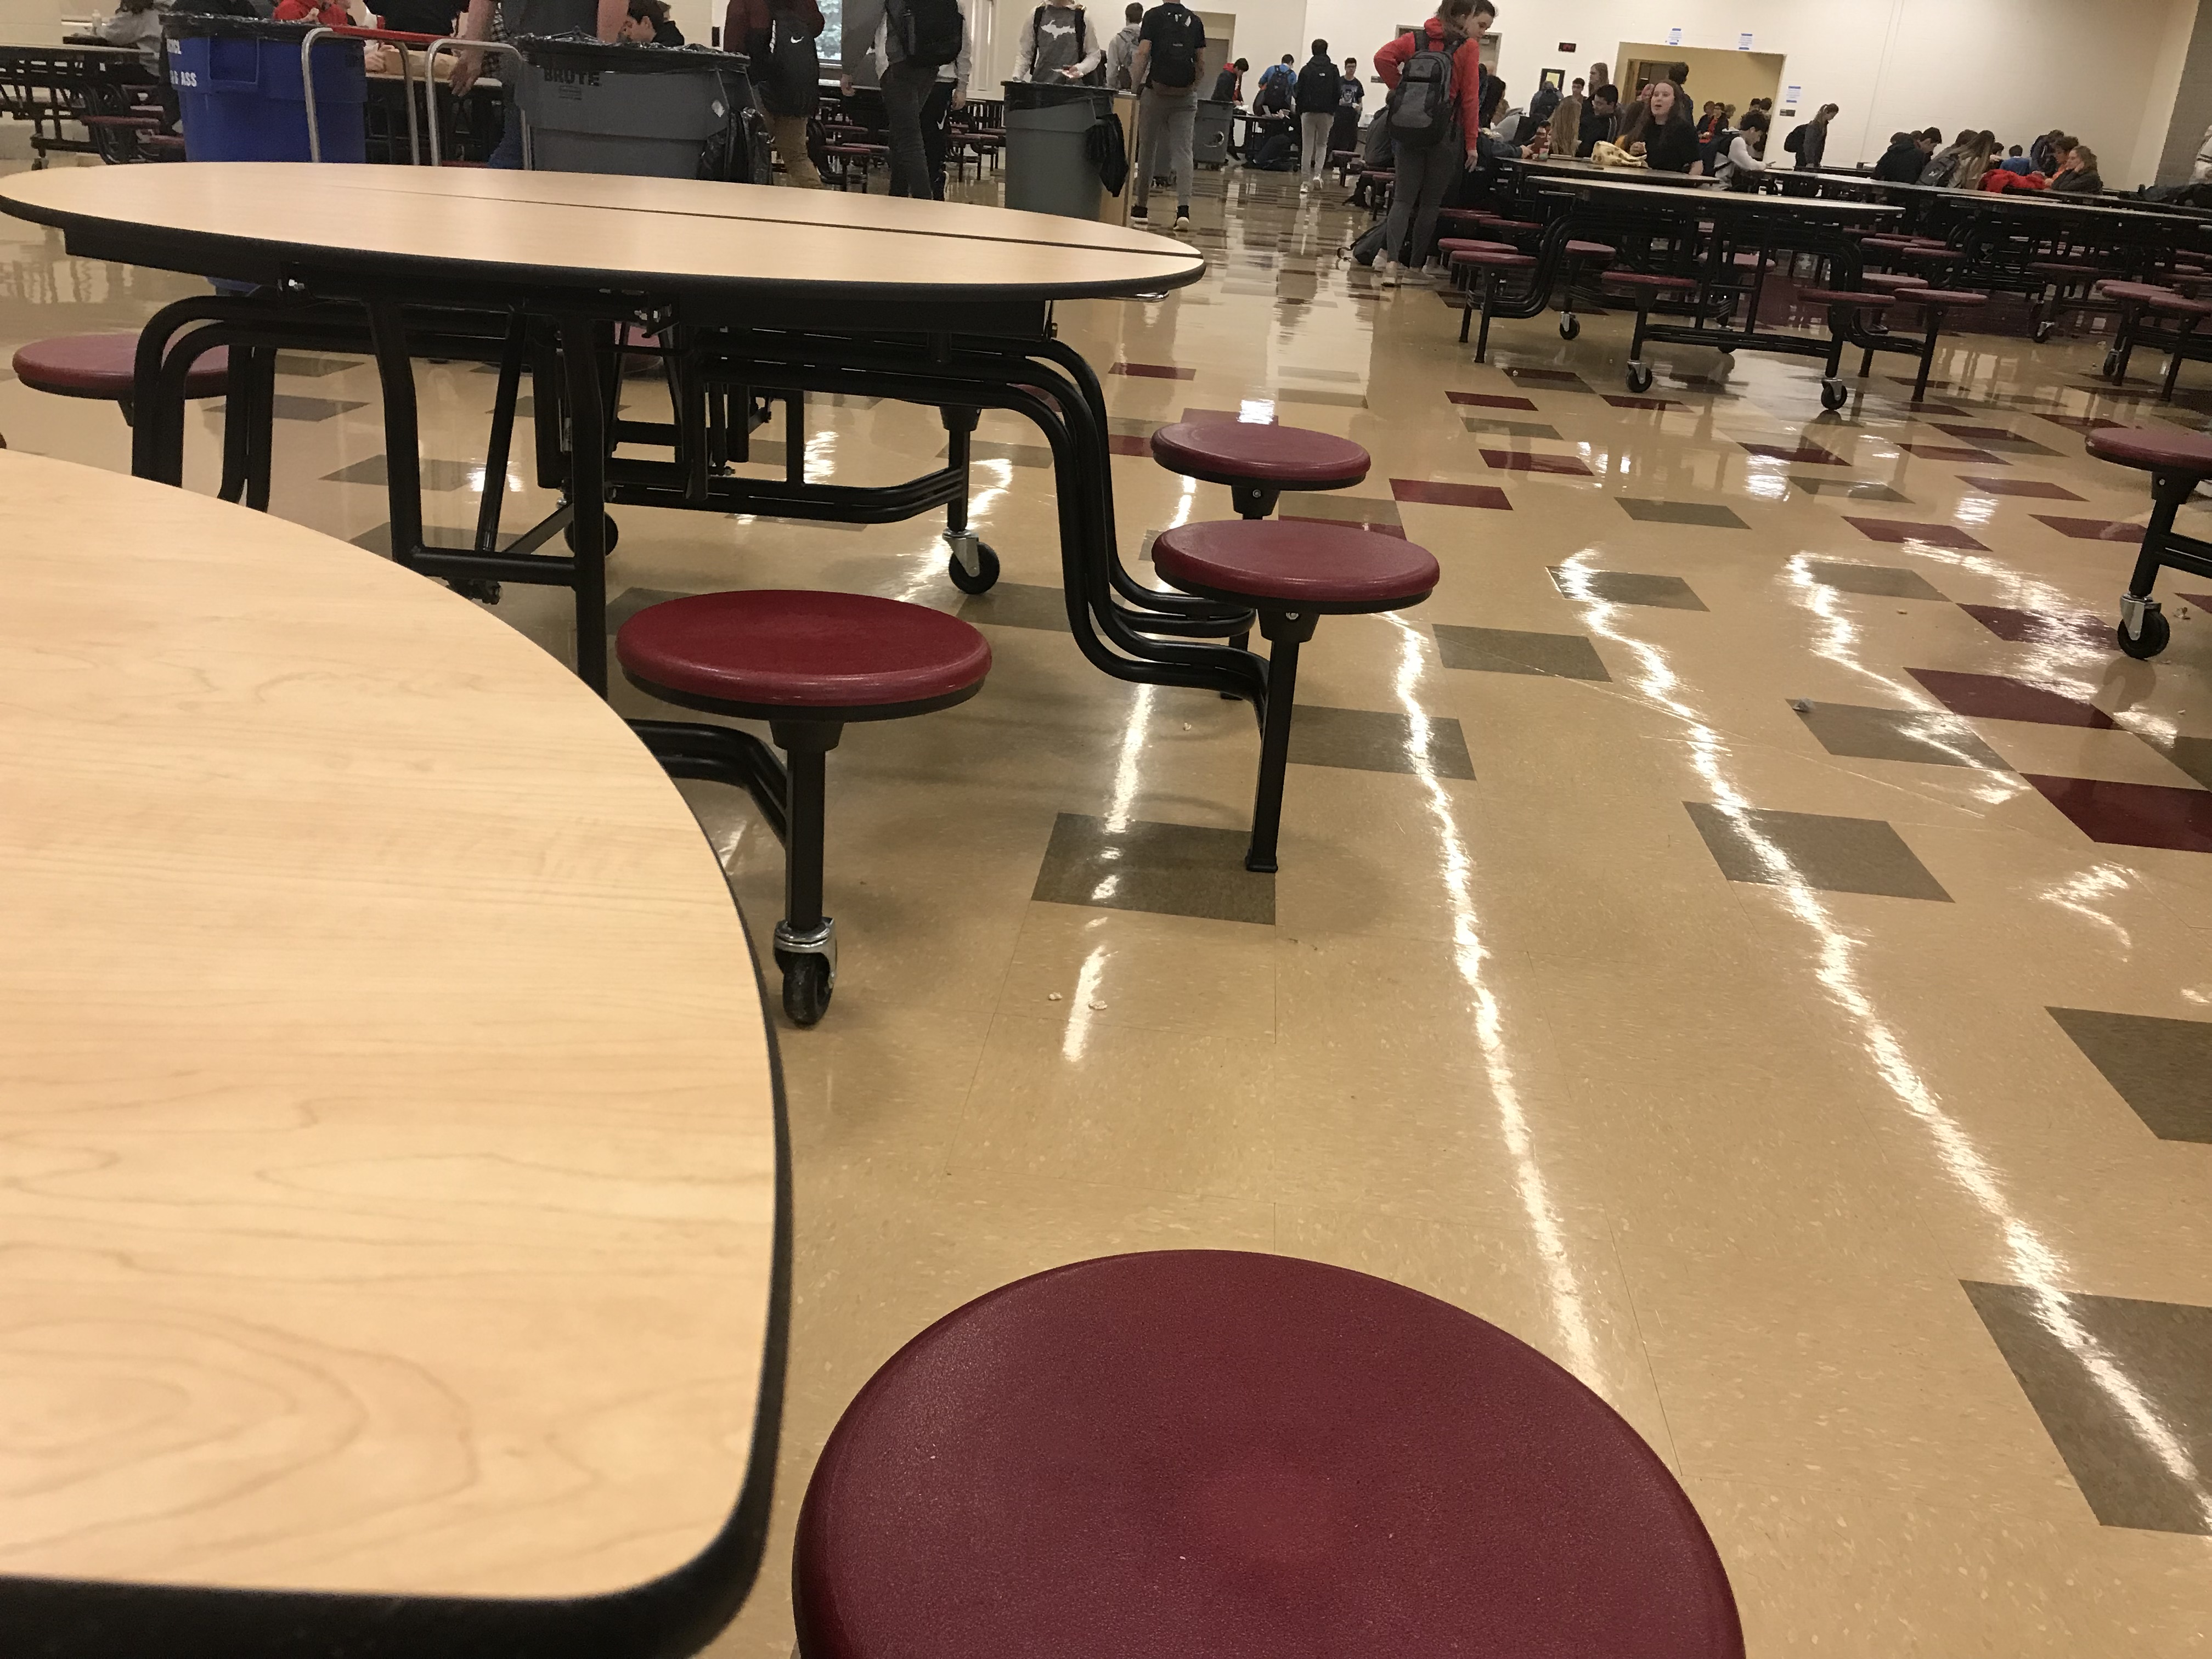 OPINION: Why BHS lunch tables are not the best